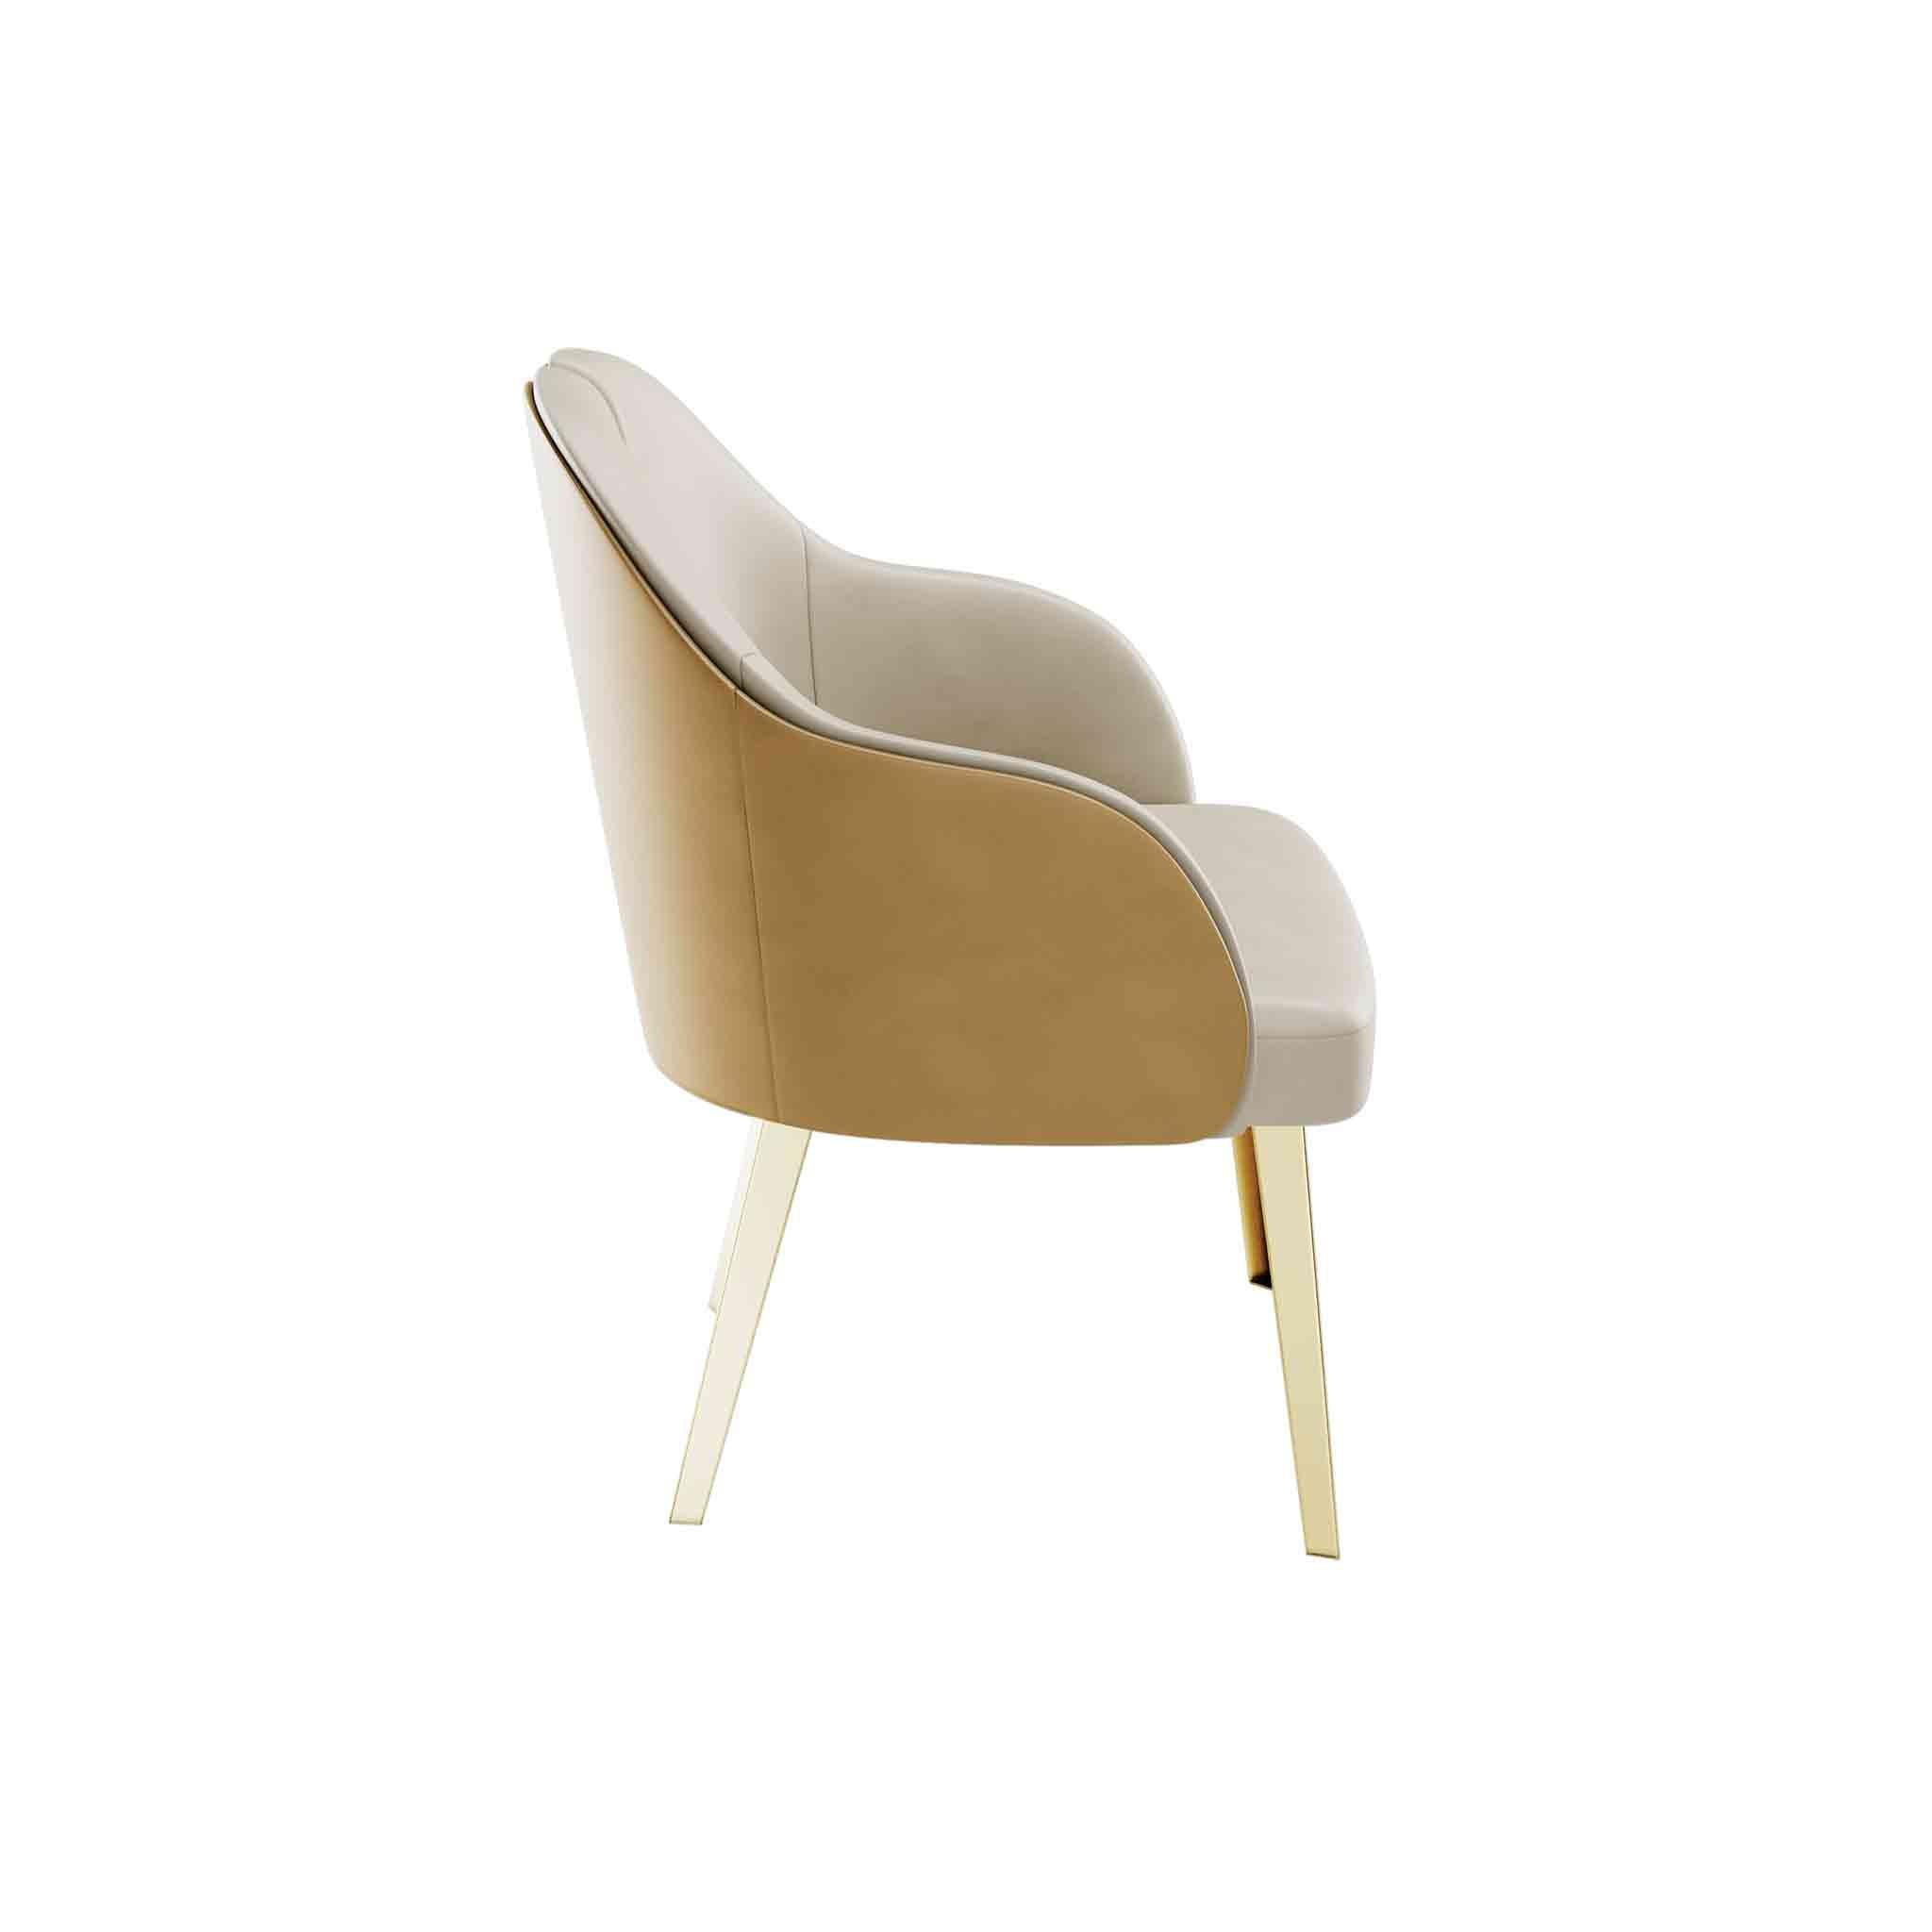 Modern Classic Dining Room Chair in Leather & Polished Golden Brass Details In New Condition For Sale In Porto, PT